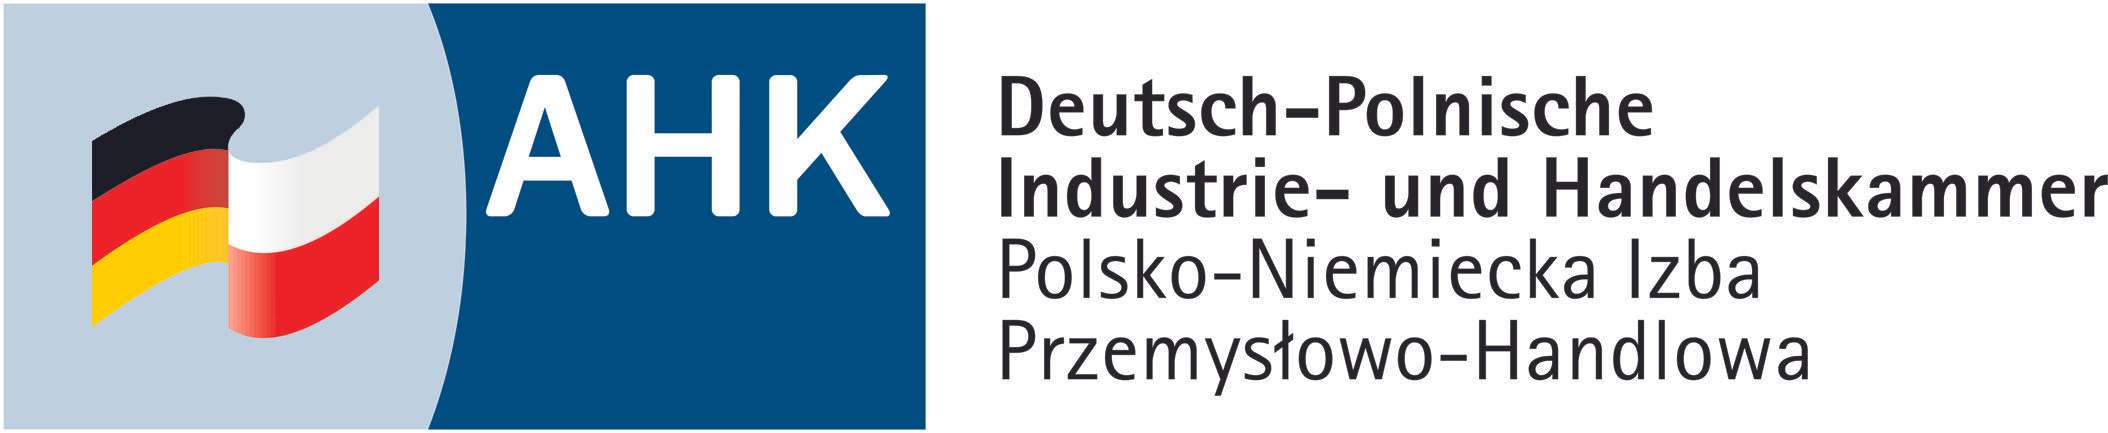 Polish – German Chamber of Industry and Commerce 